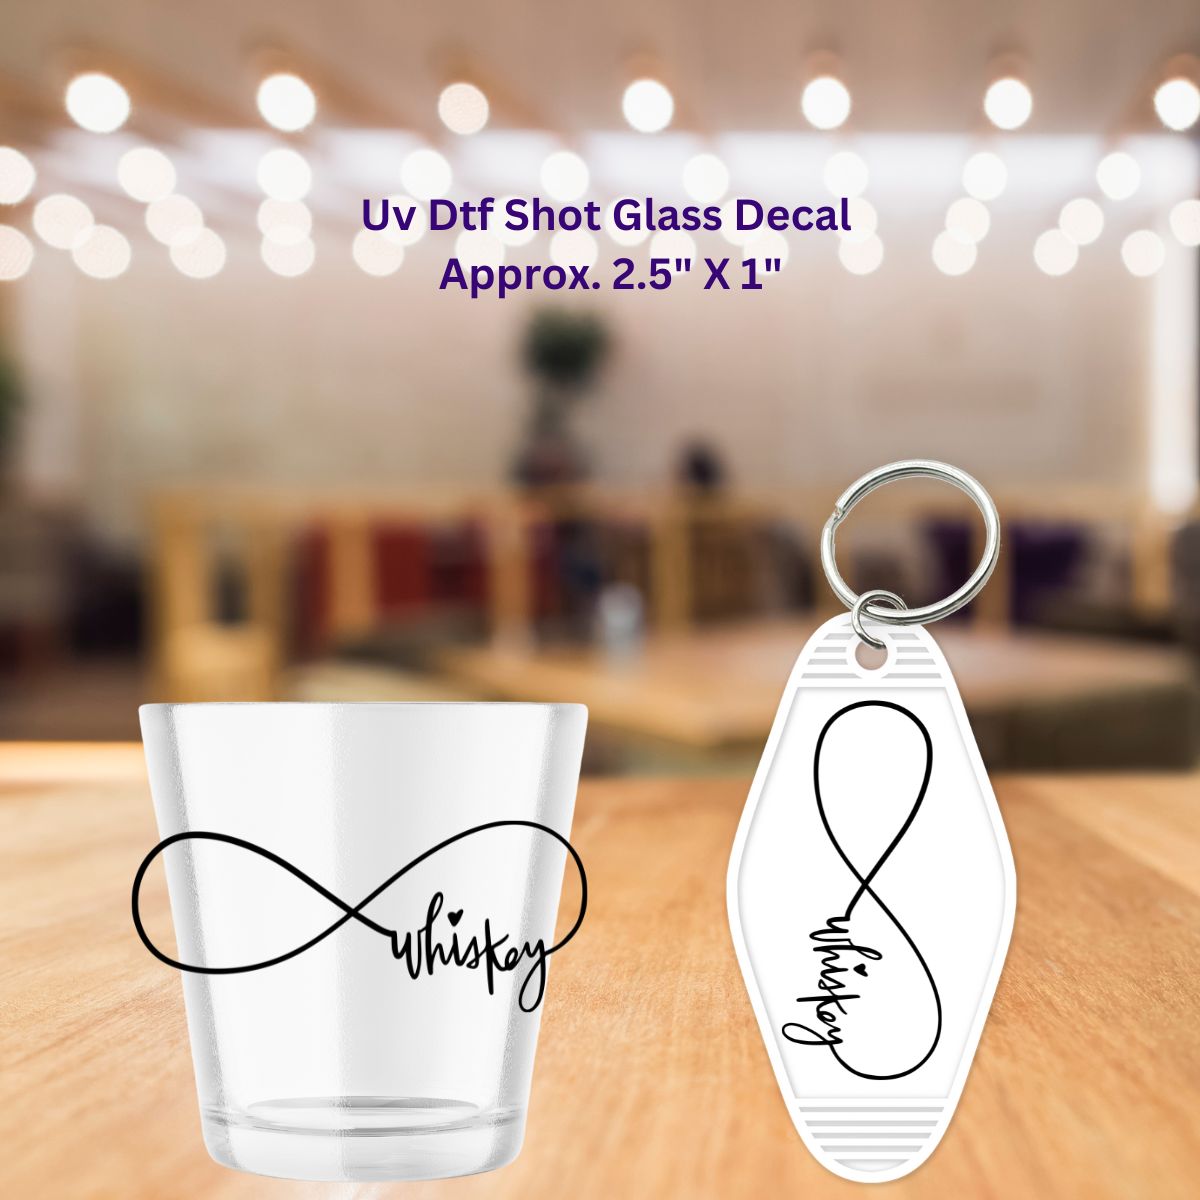 Uv Dtf Shot Glass or Motel Keychain Decal Whiskey Infinity Single Decal